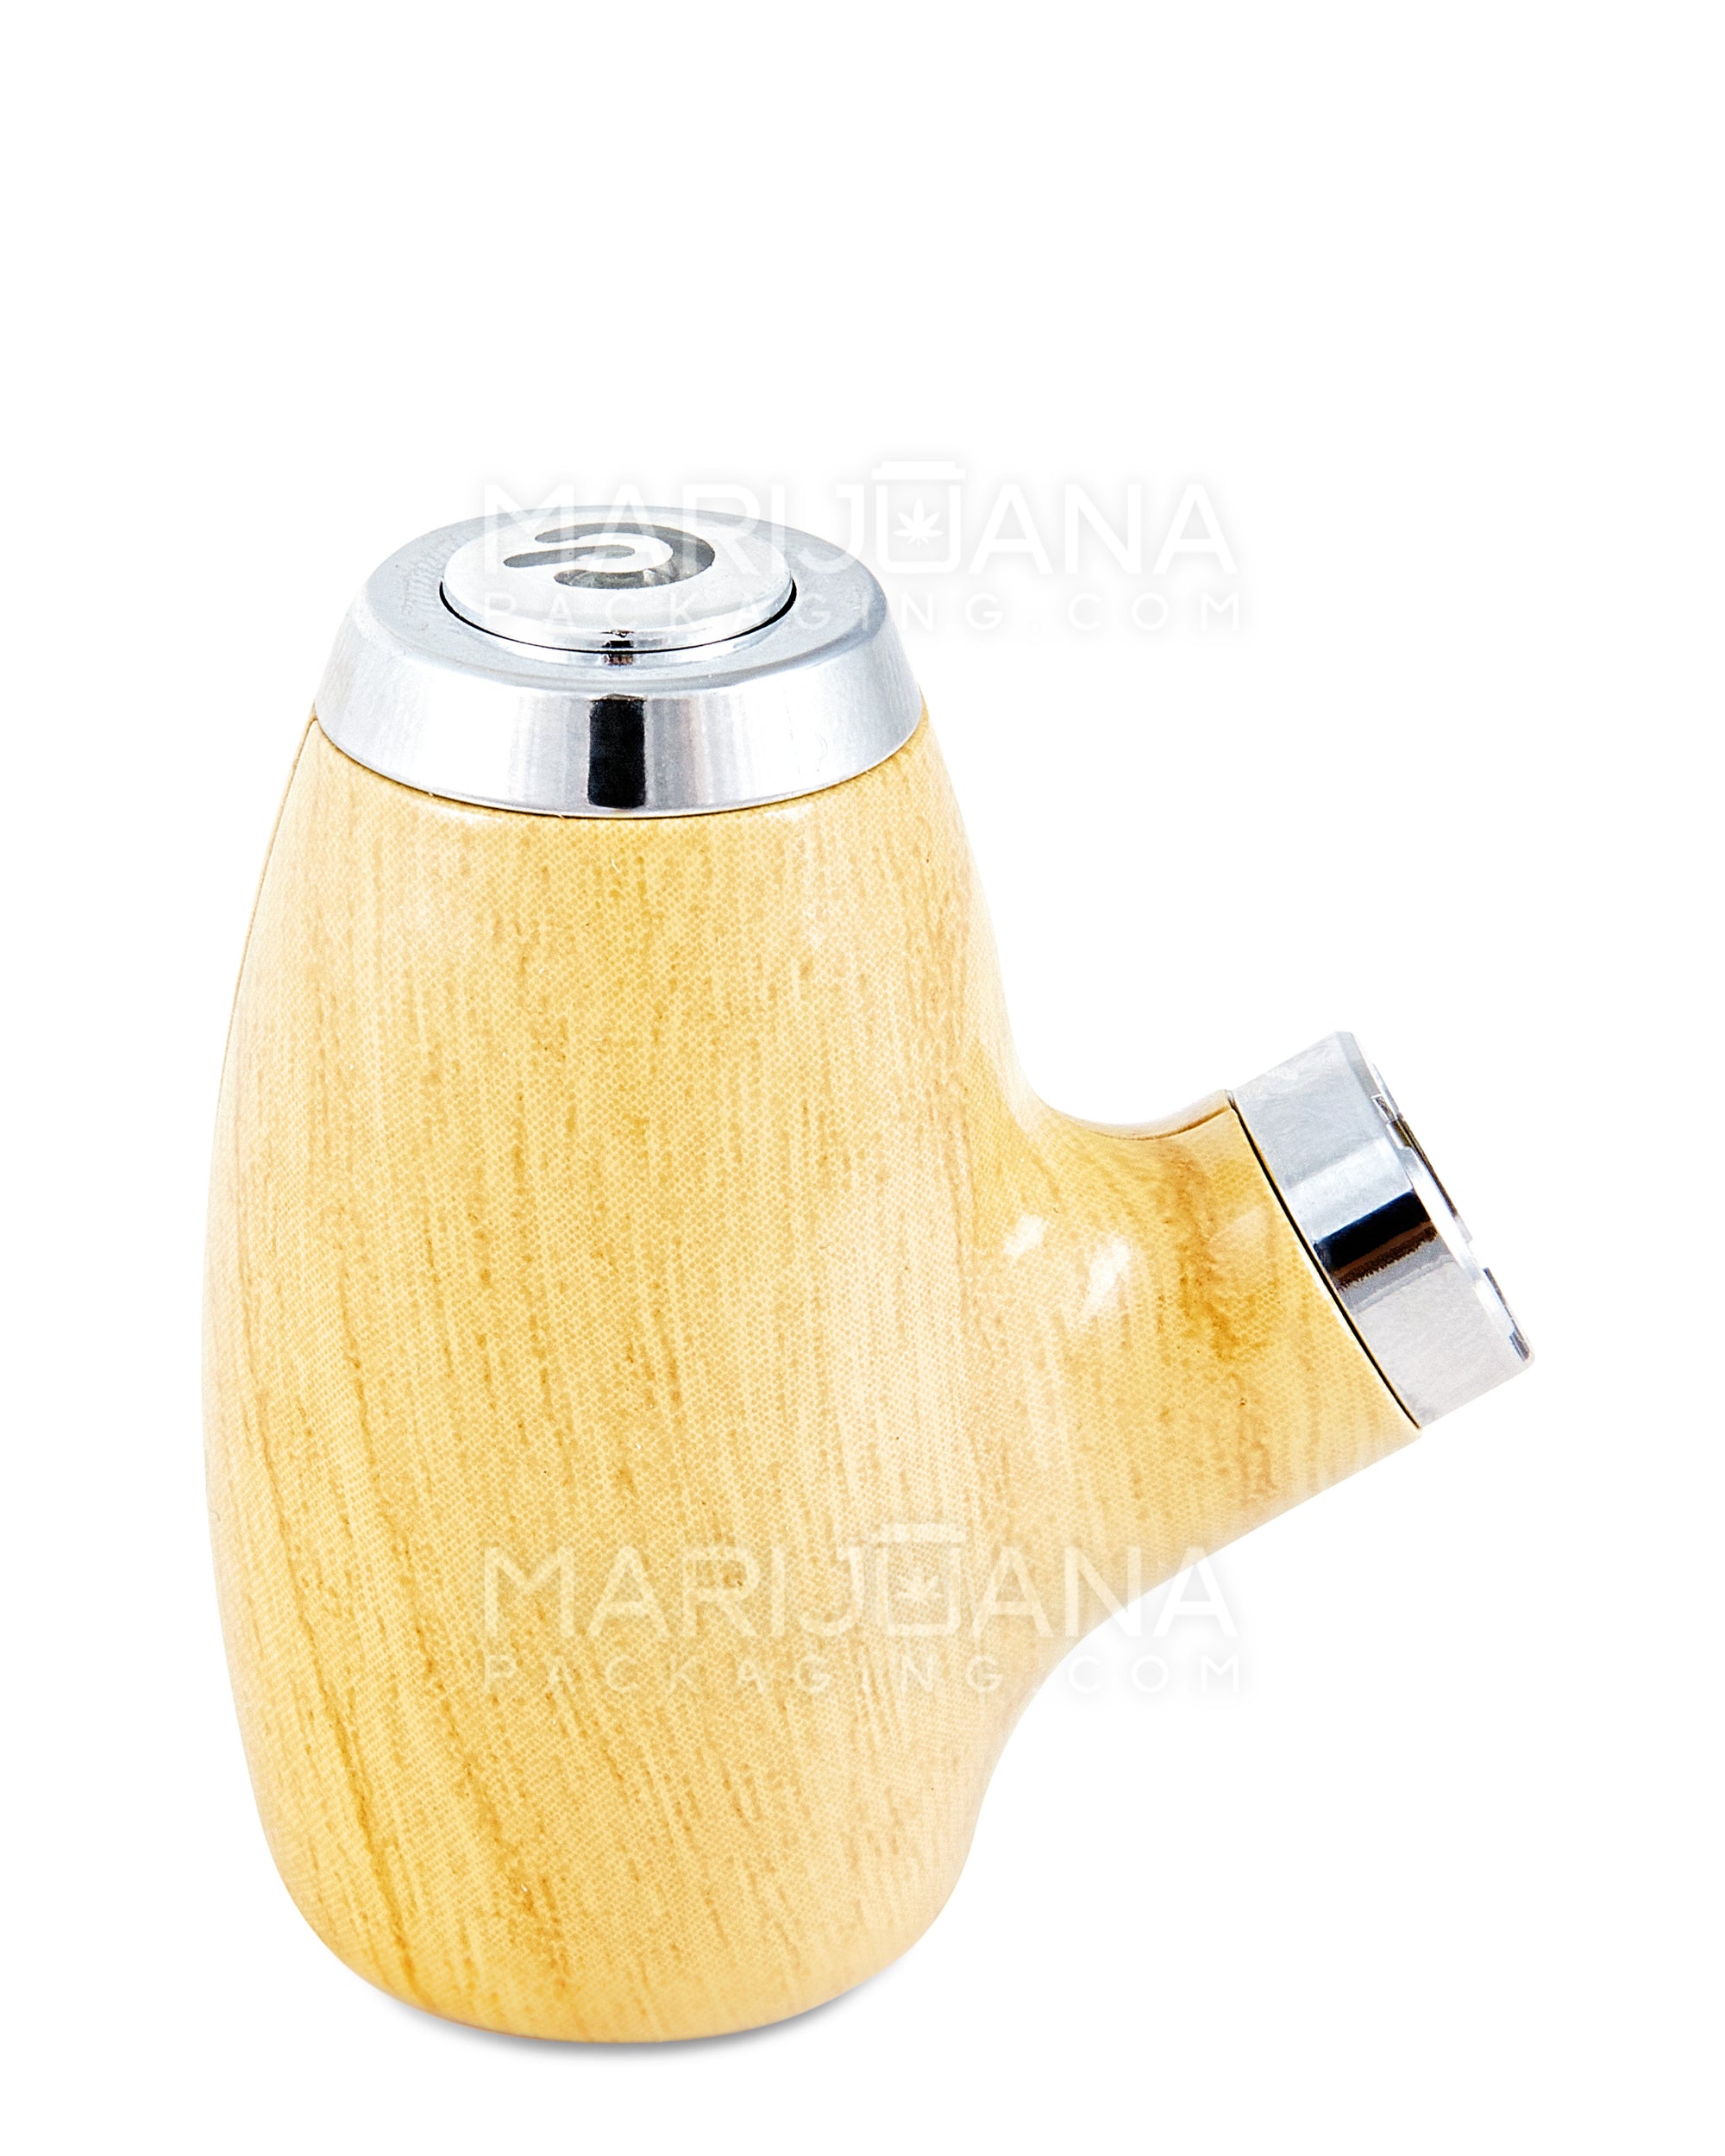 Variable Voltage "Old Man's Pipe" Shaped Vape Cartridge Battery | 900mah - Spruce Wood - 510 Thread - 1